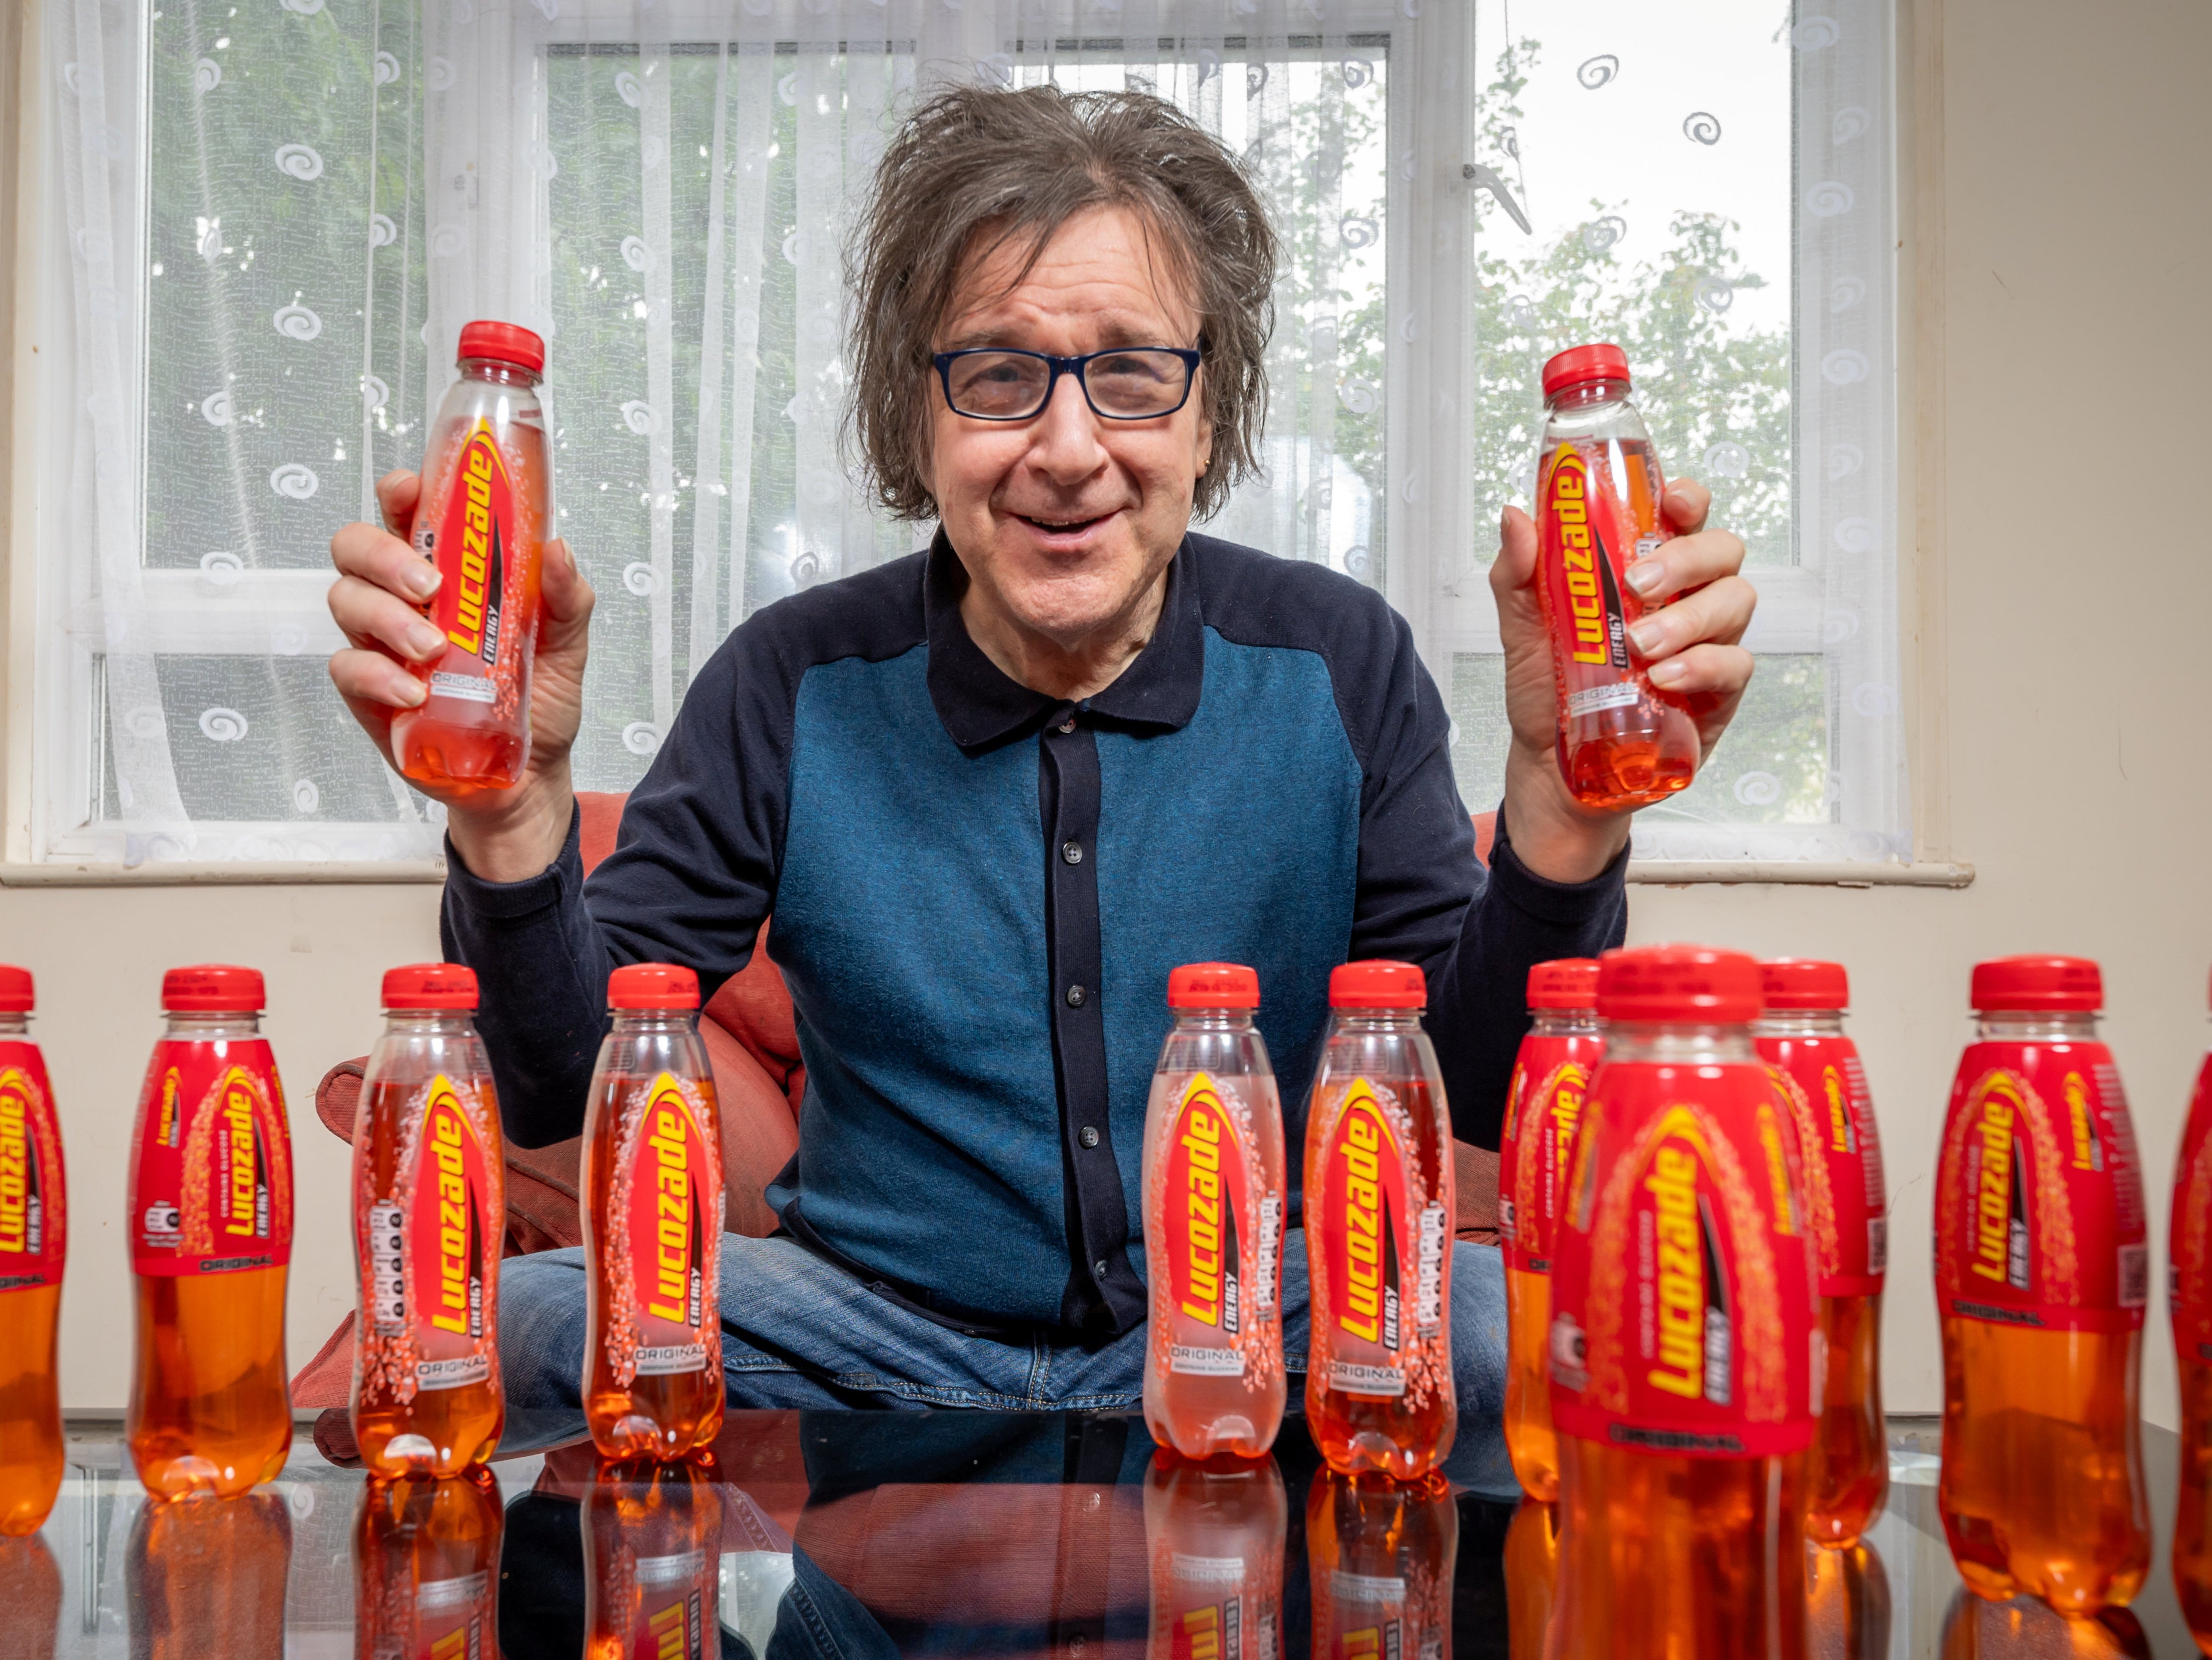 Garry Johnson is addicted to Lucozade and gets through eight bottles a day